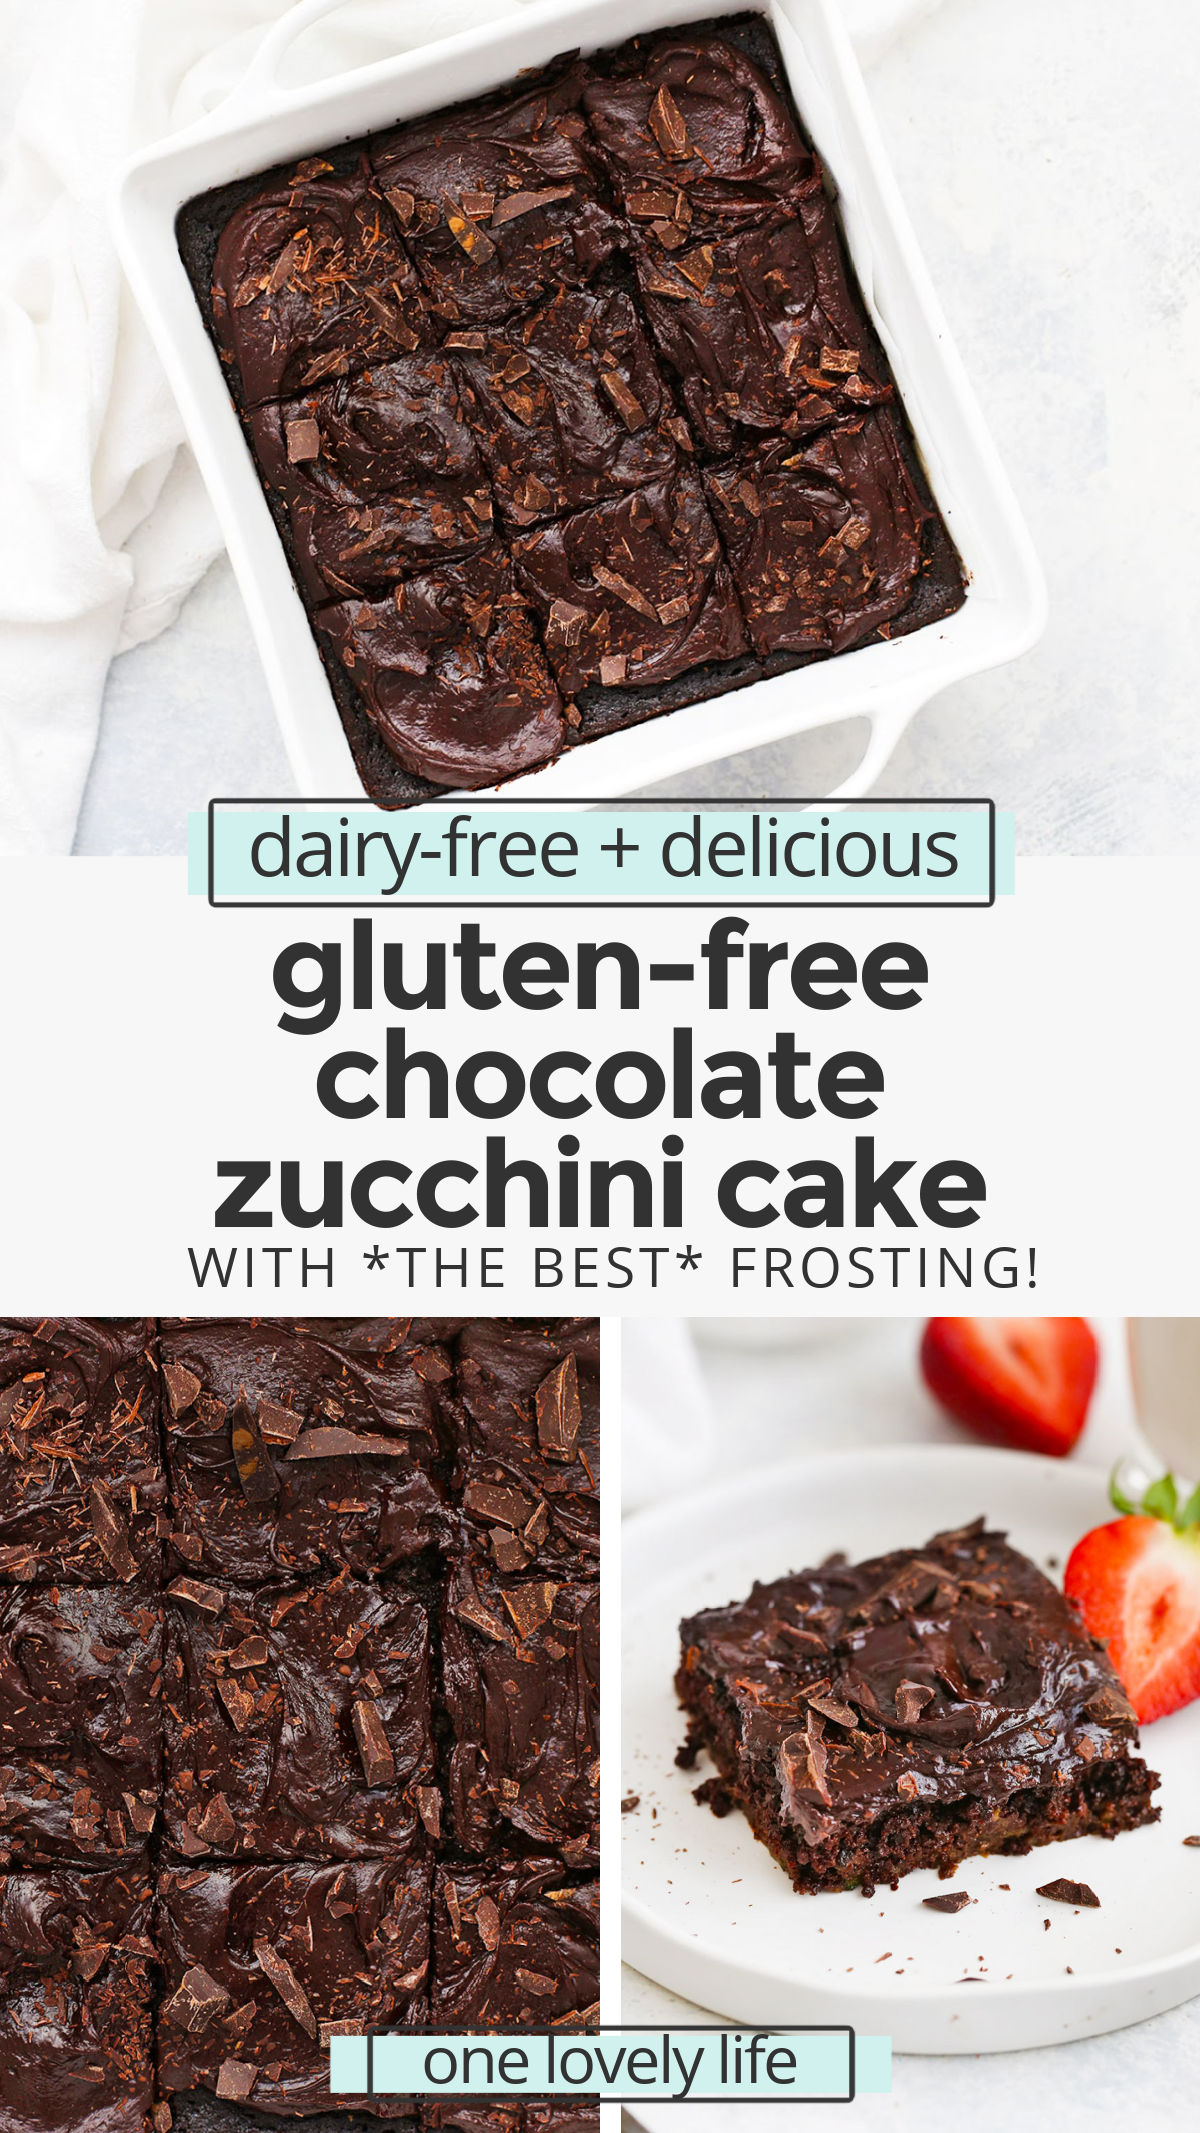 The BEST Gluten Free Chocolate Zucchini Cake. This gorgeous almond flour chocolate zucchini cake is packed with chocolate flavor. It's rich and decadent and 100% naturally sweetened! You'll love the paleo chocolate frosting! // gluten free cake recipe // gluten free chocolate cake recipe // dairy free chocolate cake recipe // almond flour cake // gluten free zucchini cake recipe #chocolate #zucchini #zucchinicake #chocolatecake #glutenfreecake #glutenfreechocolatecake #paleocake #almondflourcake